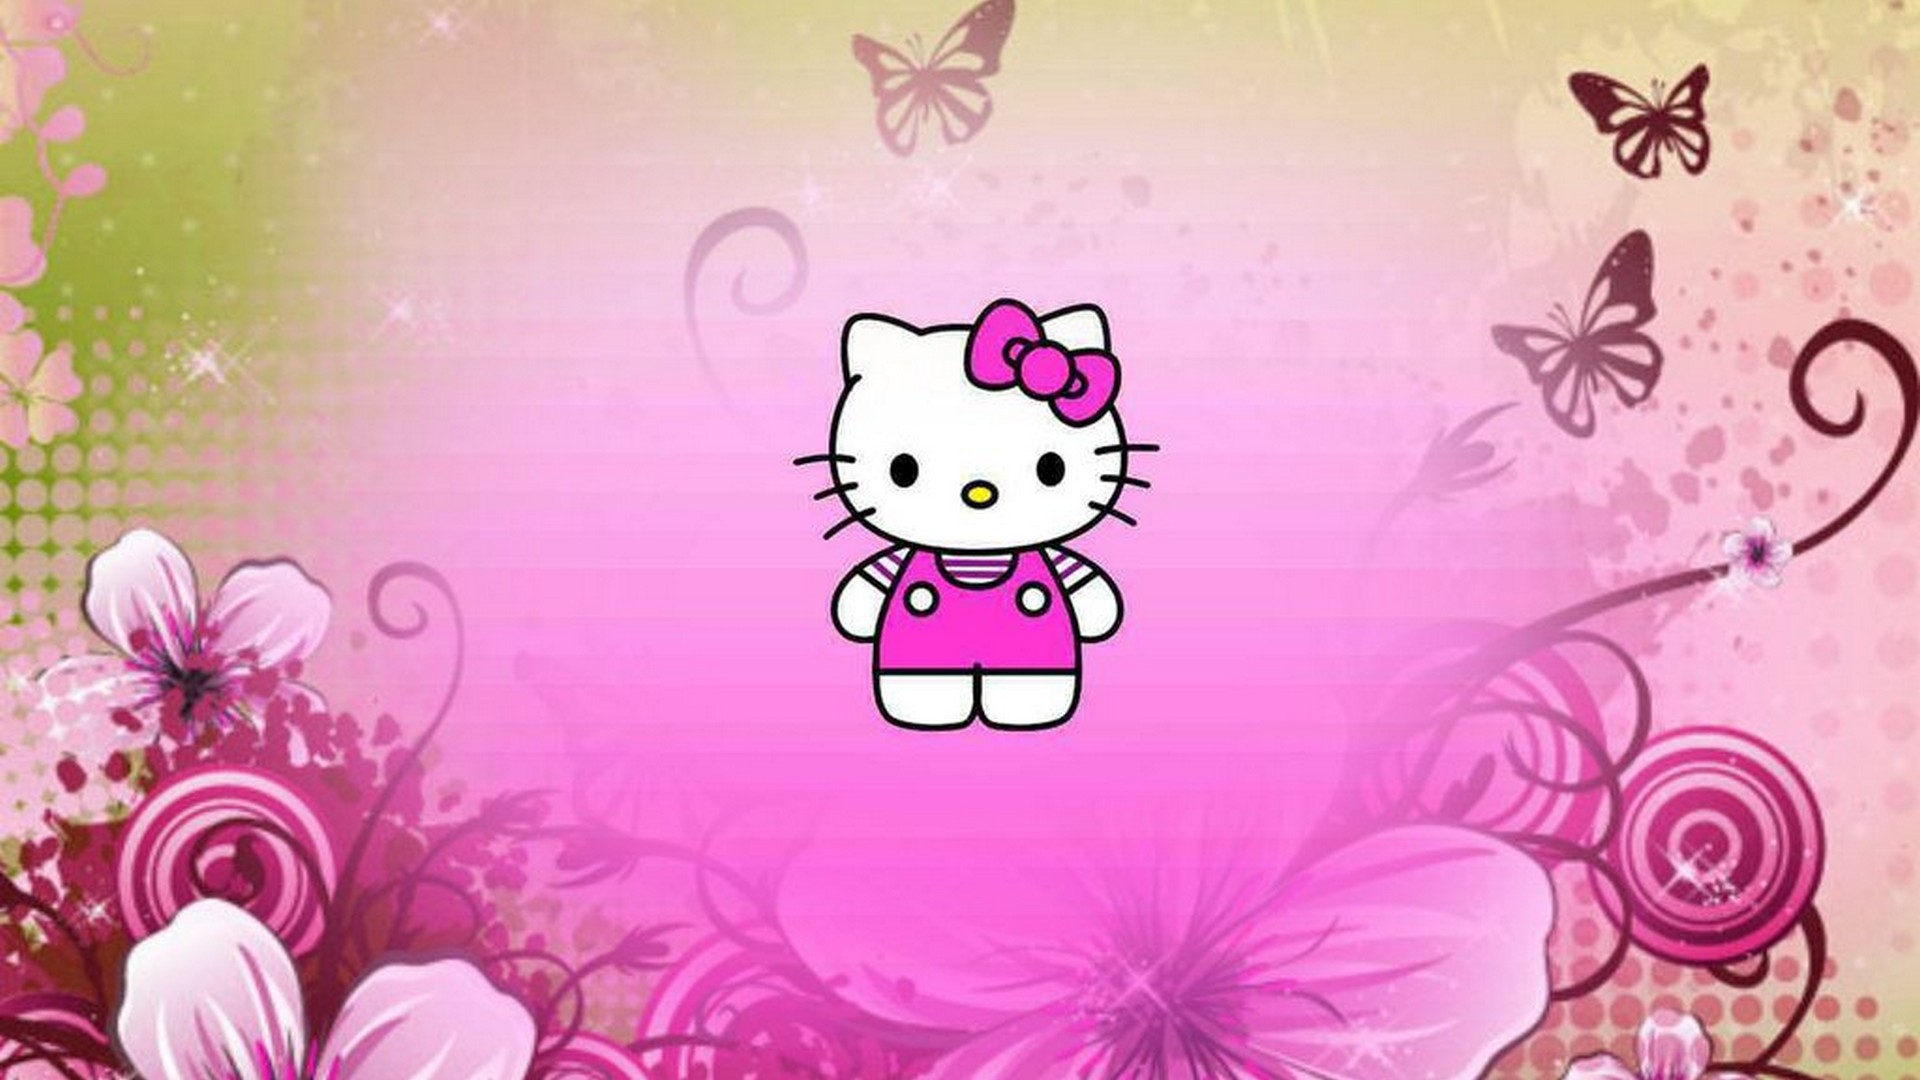 Wallpaper Sanrio Hello Kitty HD With Resolution 1920X1080 pixel. You can make this wallpaper for your Desktop Computer Backgrounds, Mac Wallpapers, Android Lock screen or iPhone Screensavers